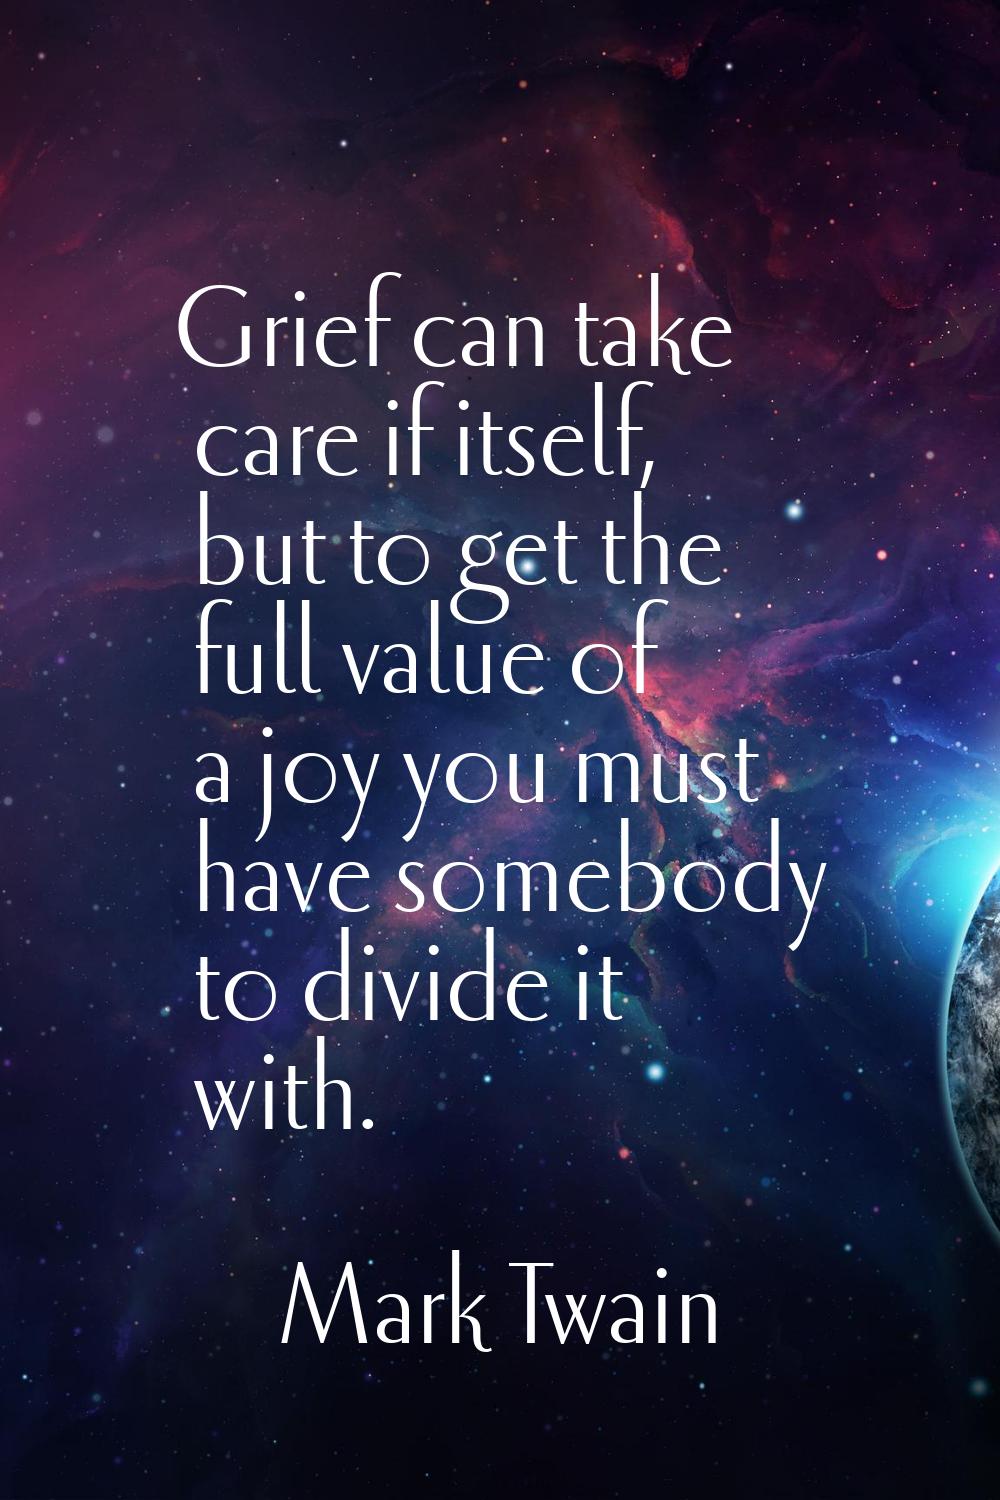 Grief can take care if itself, but to get the full value of a joy you must have somebody to divide 